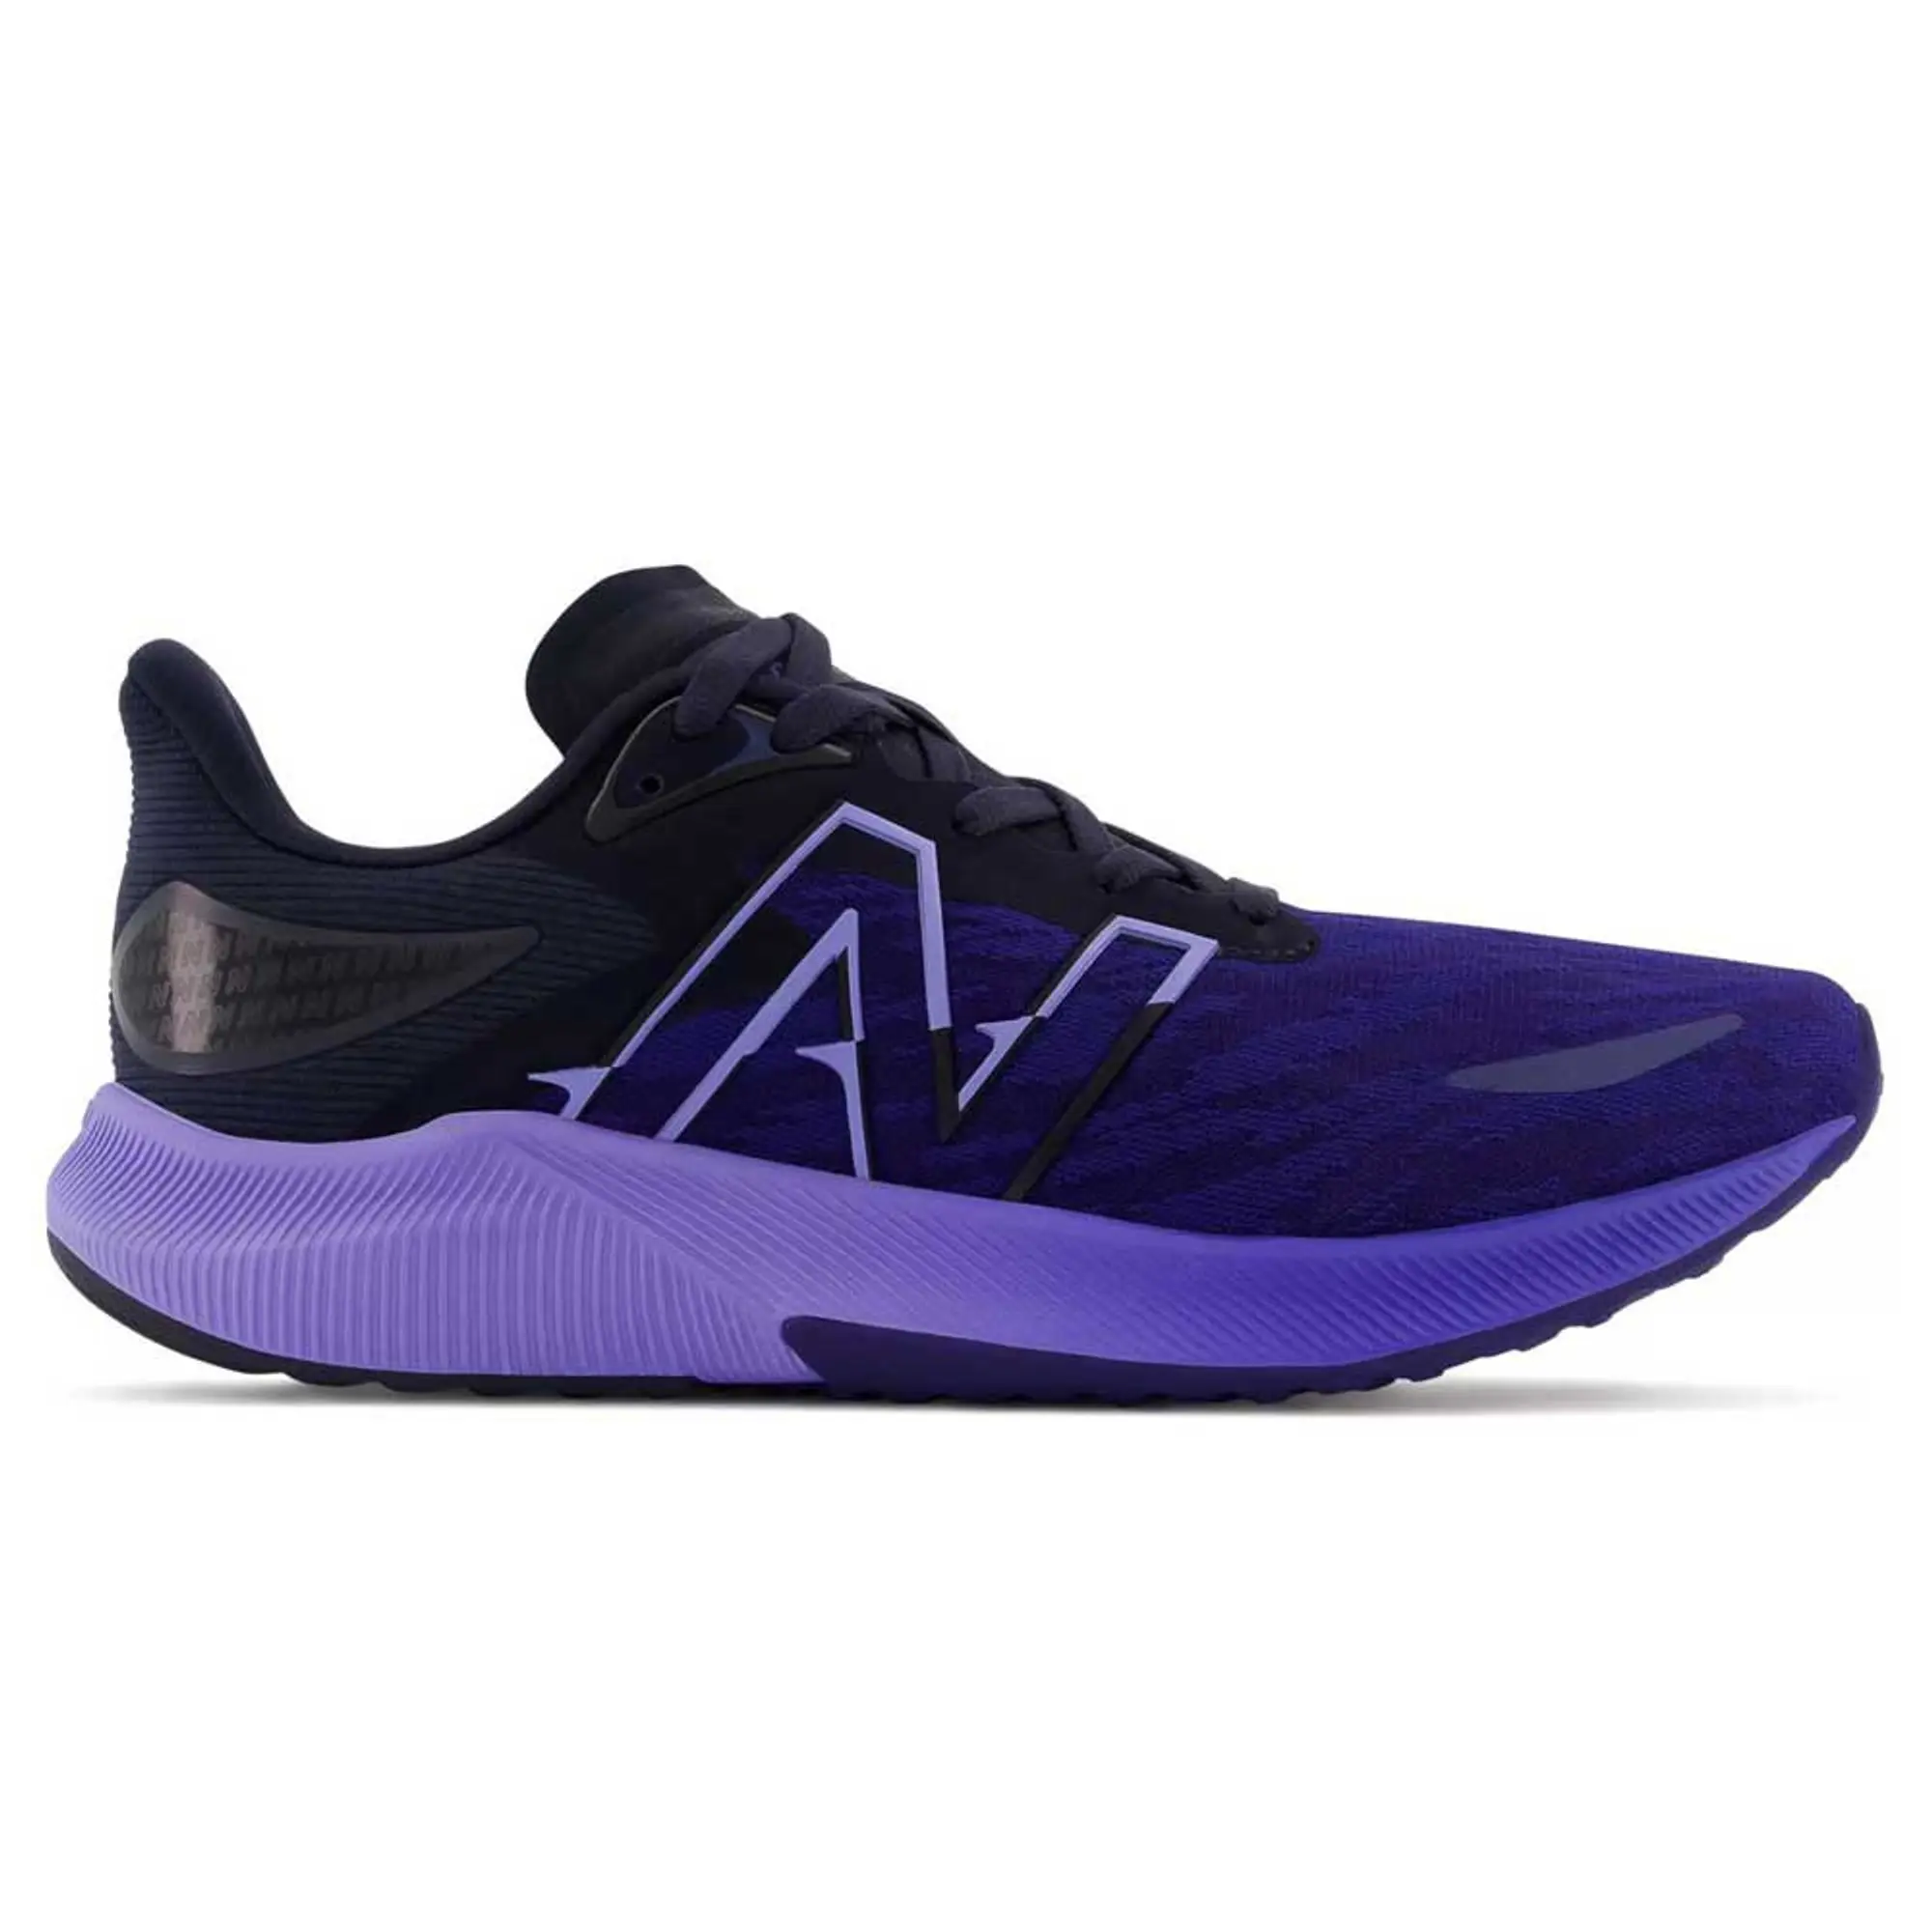 New Balance Women's FuelCell Propel v3 in Blue/Purple Synthetic